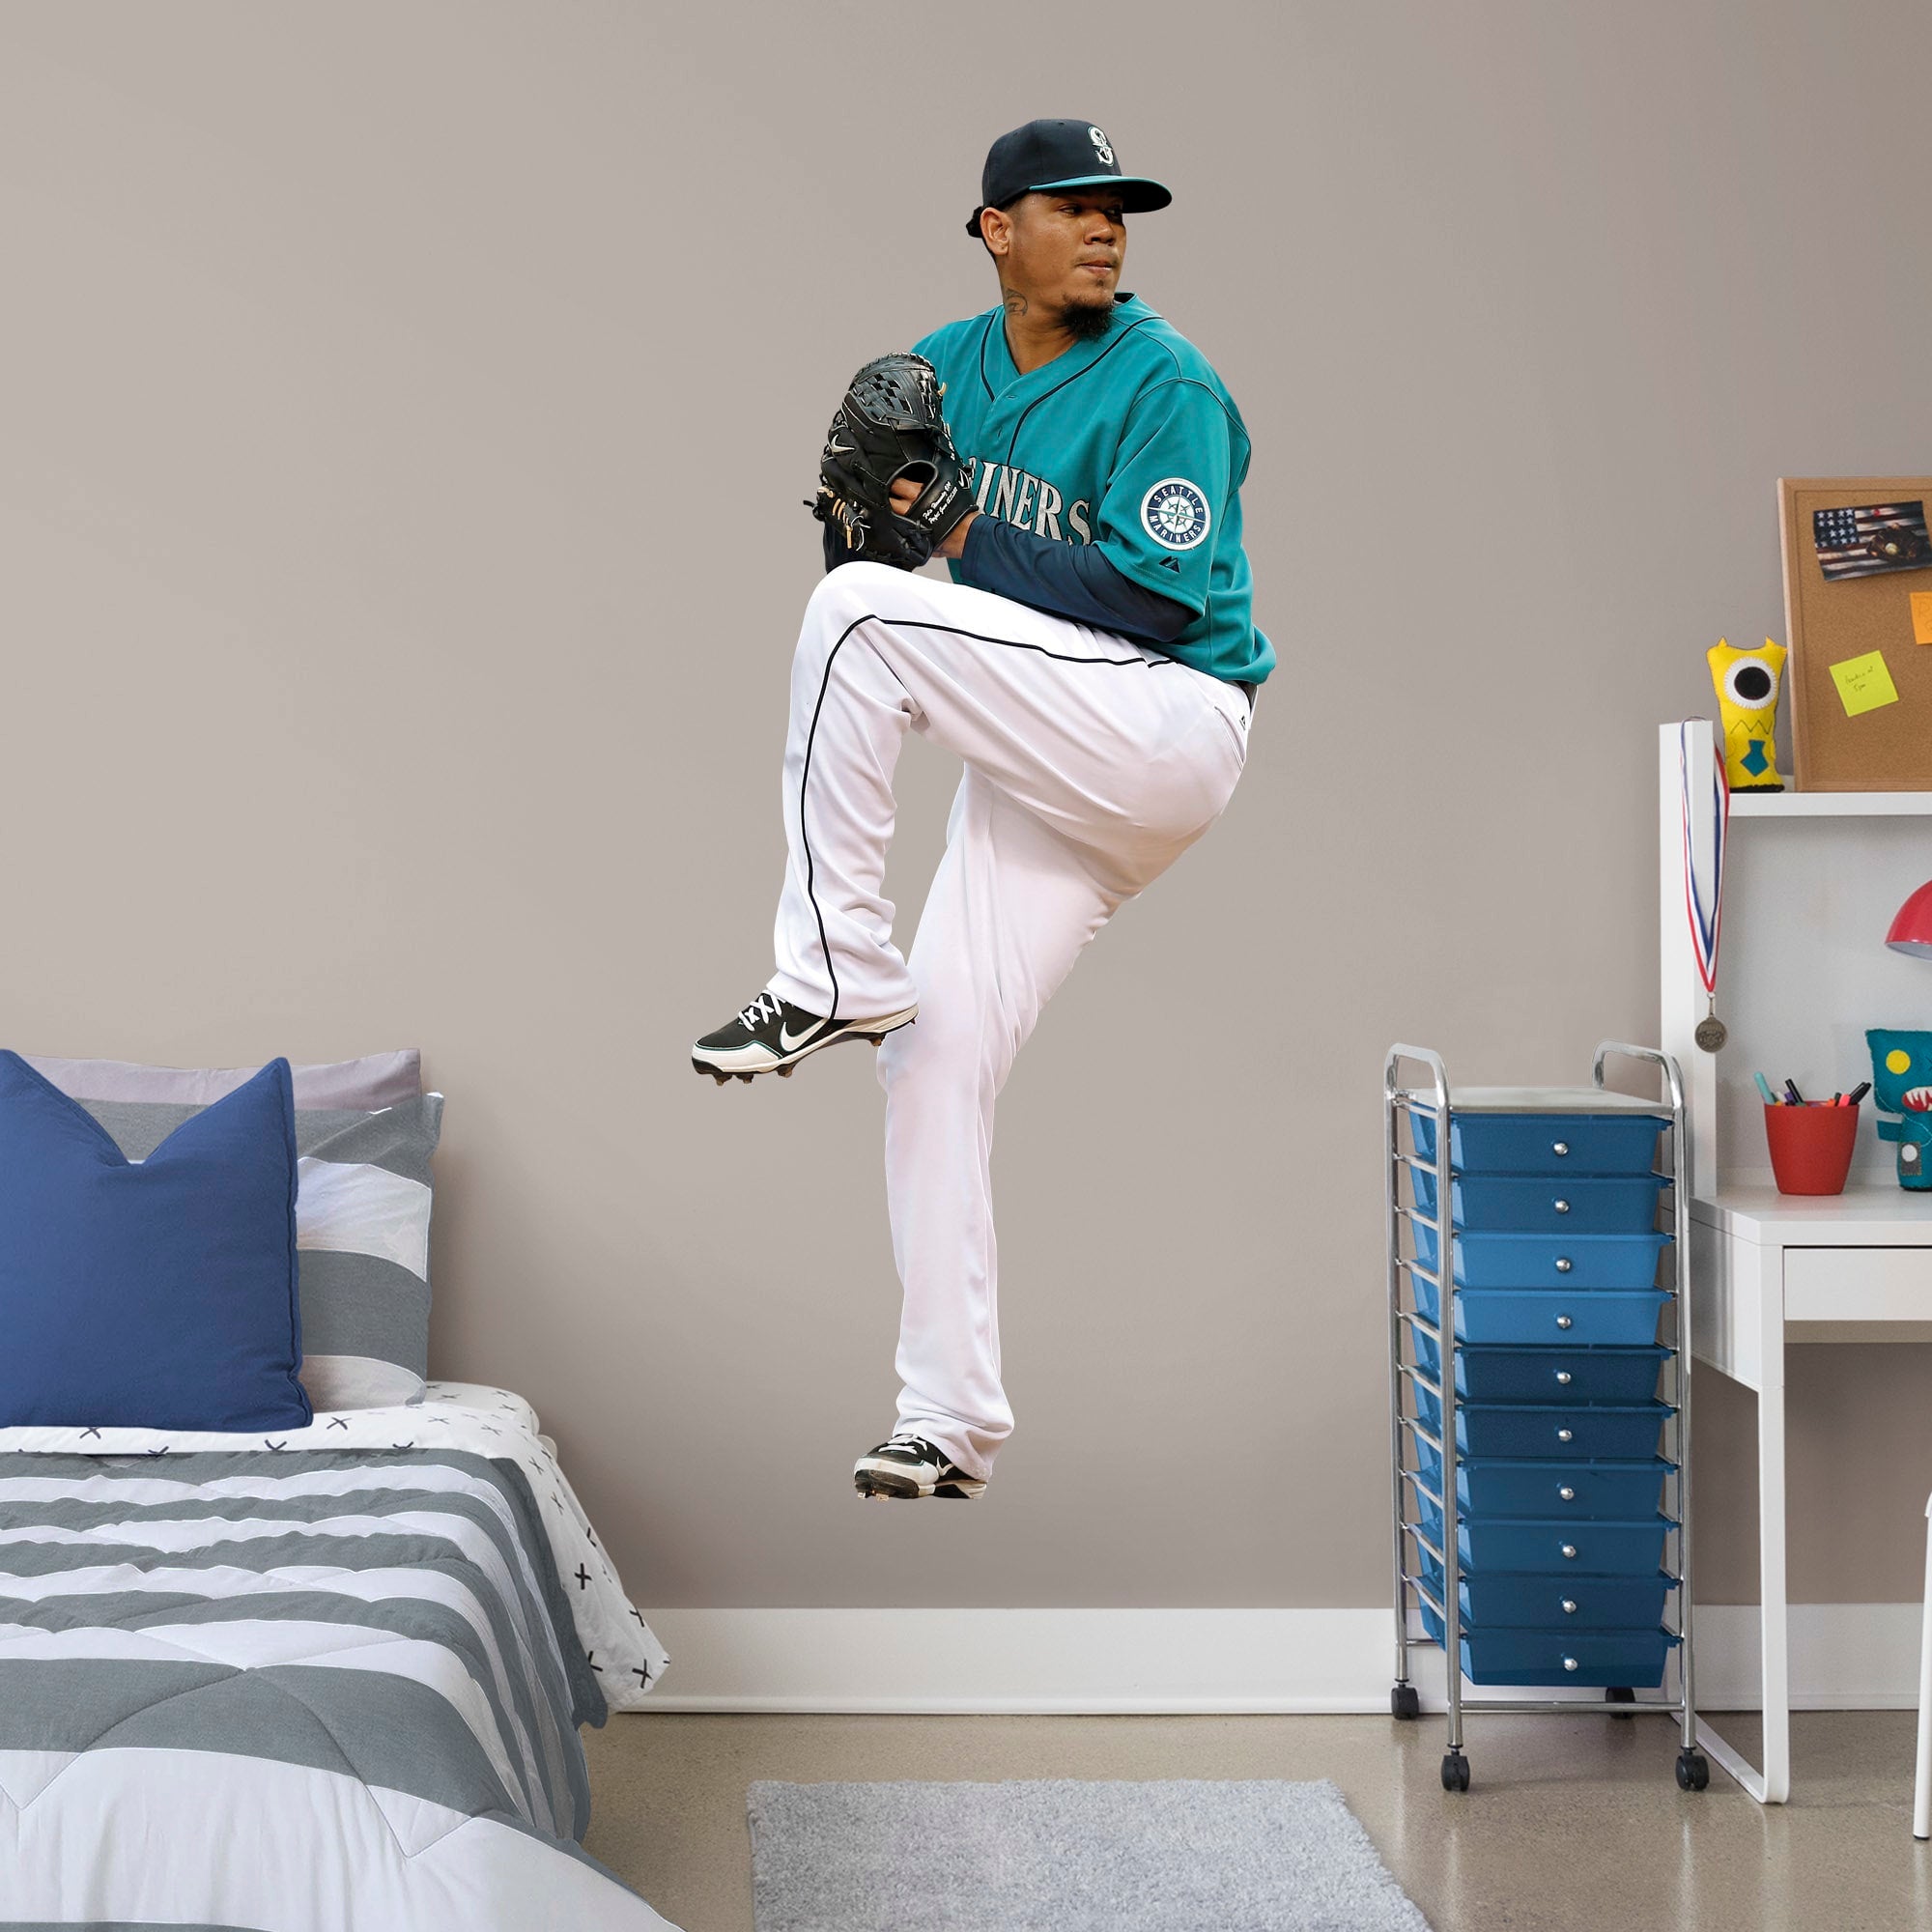 Felix Hernandez for Seattle Mariners: Pitcher - Officially Licensed MLB Removable Wall Decal XL by Fathead | Vinyl